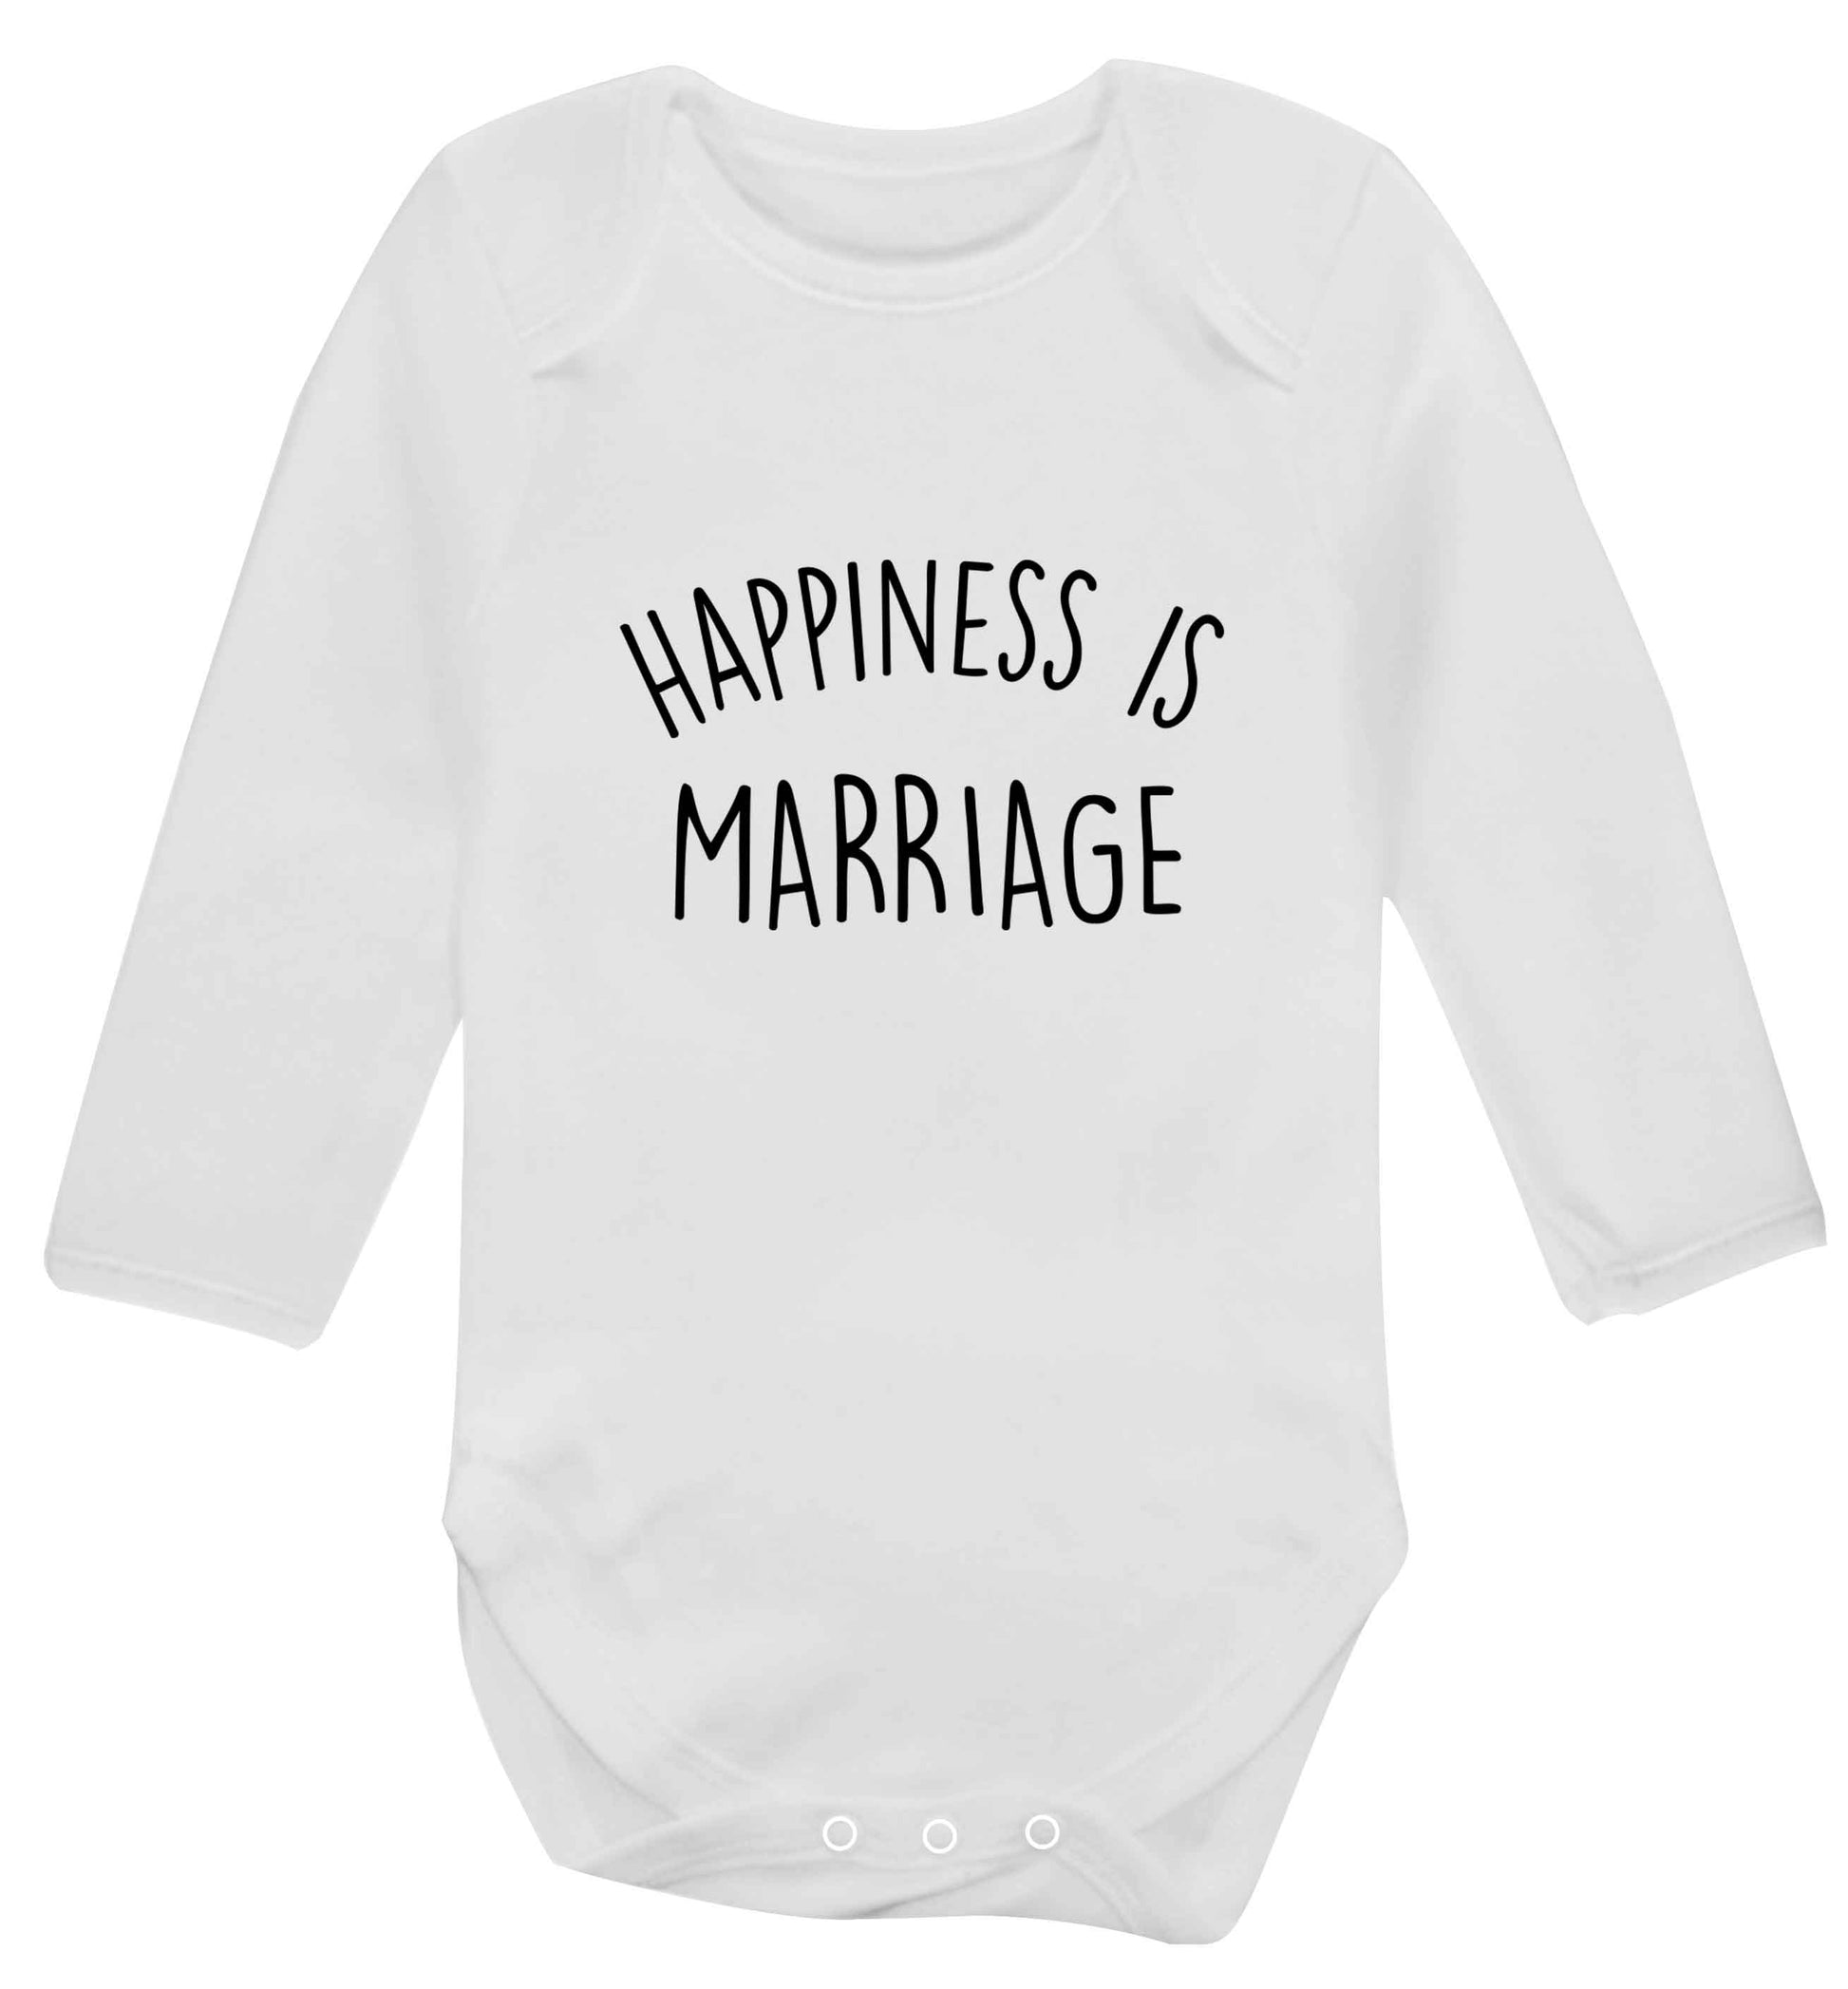 Happiness is wedding planning baby vest long sleeved white 6-12 months